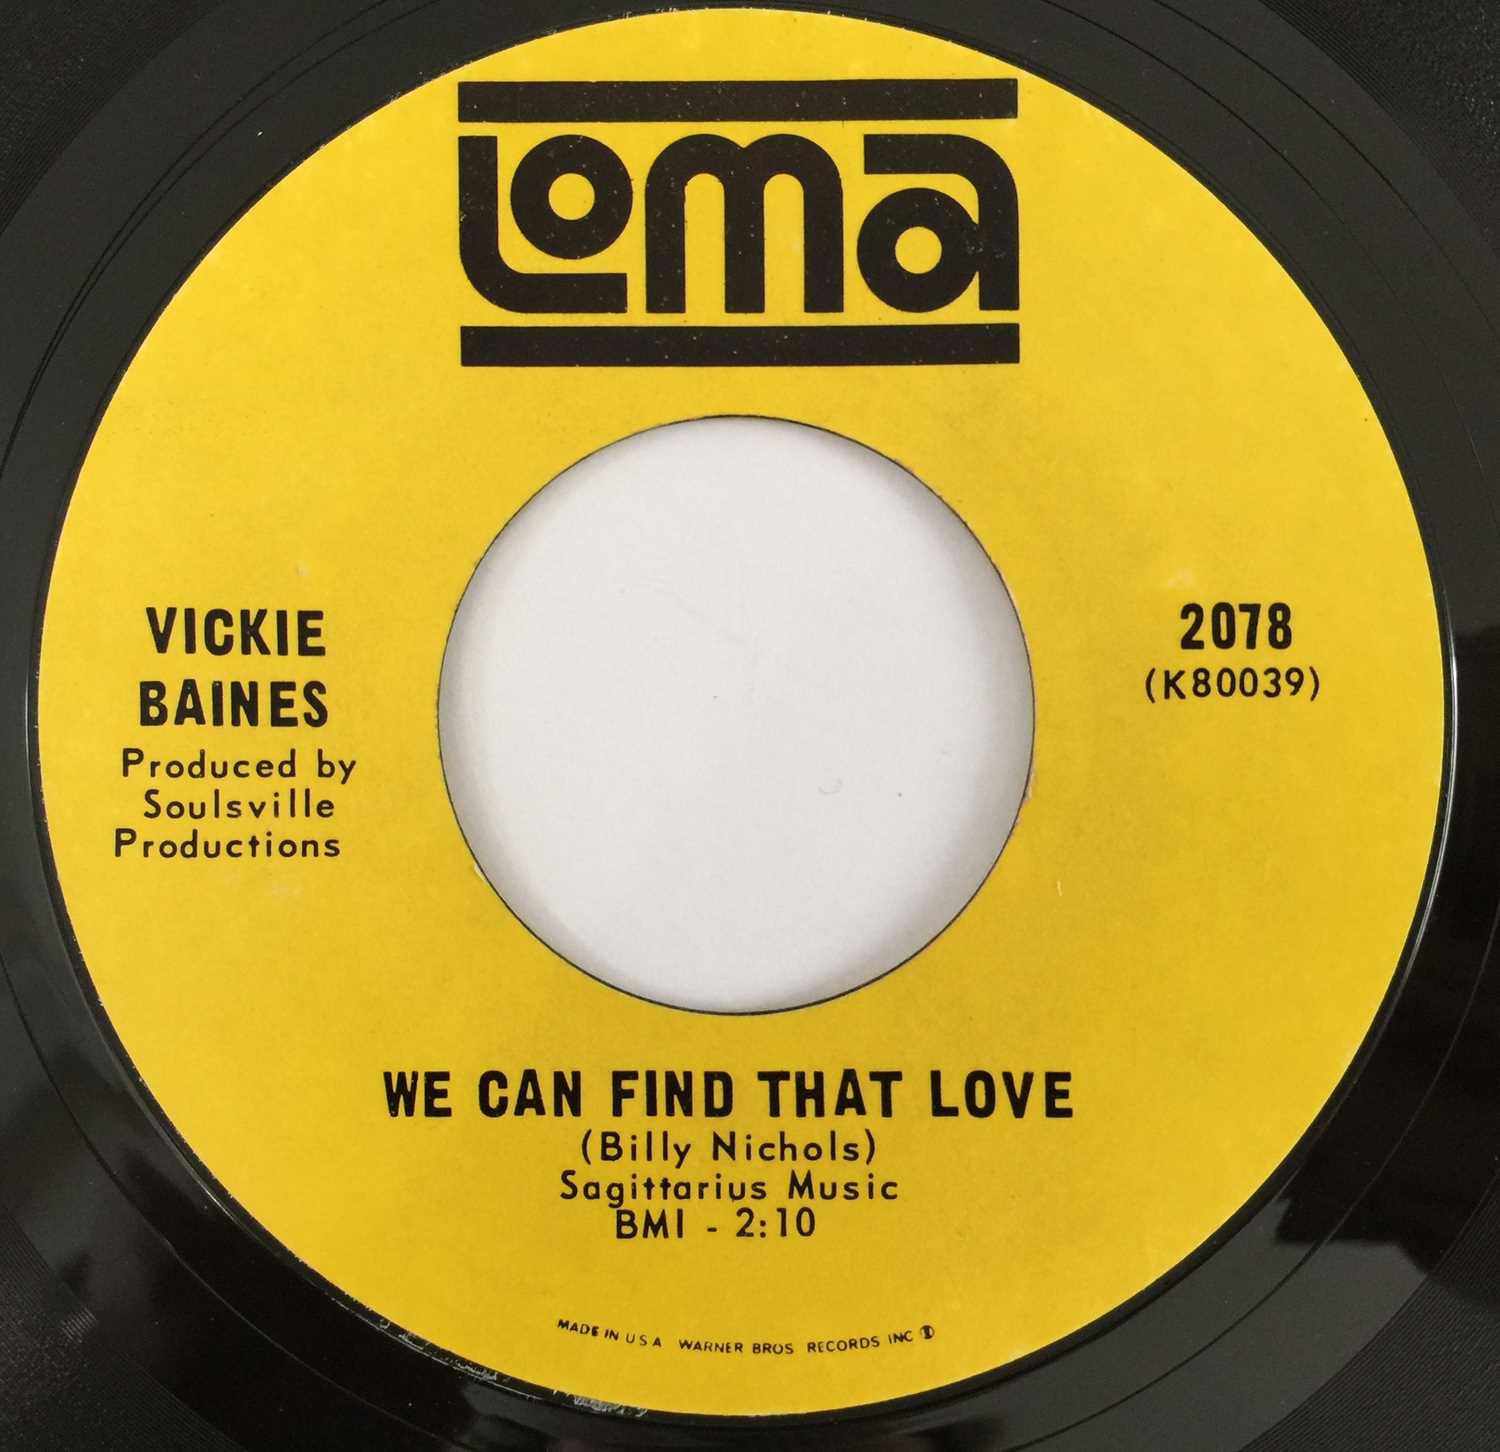 Lot 11 - VICKIE BAINES - WE CAN FIND THAT LOVE/ SWEETER THAN SWEET THINGS 7" (US LOMA - 2078)